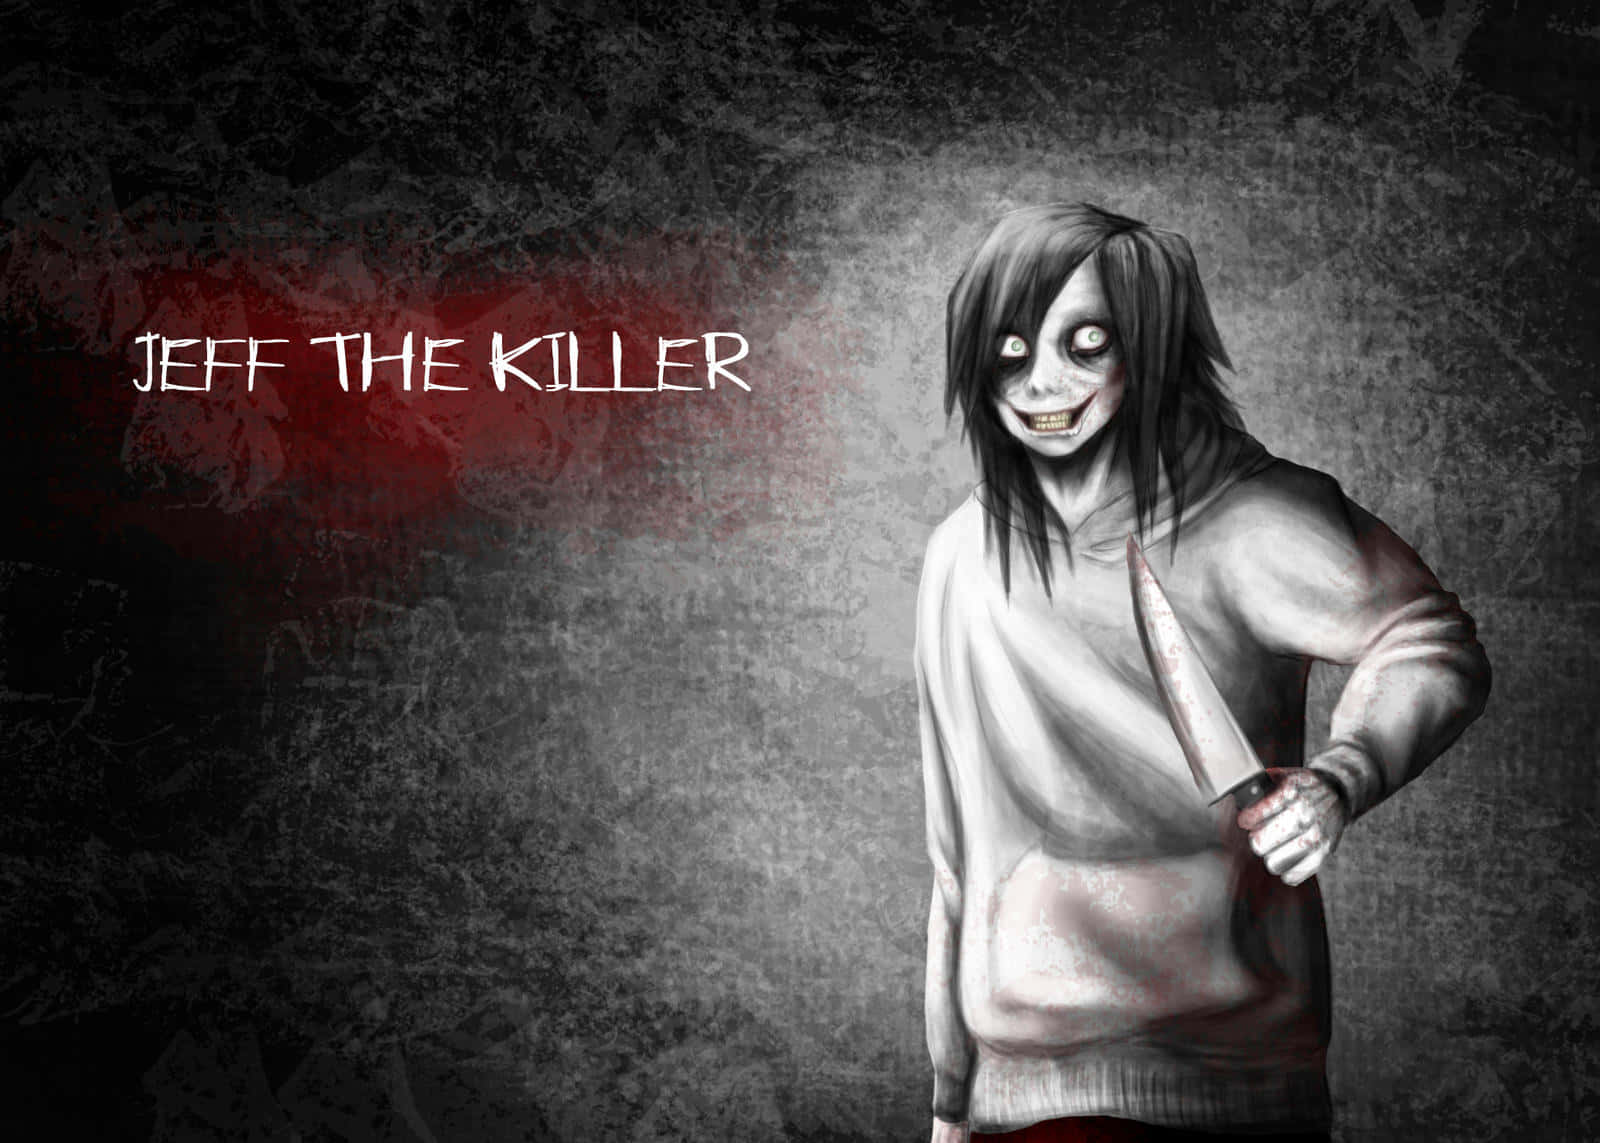 "Don't close your eyes... Jeff The Killer is coming!"